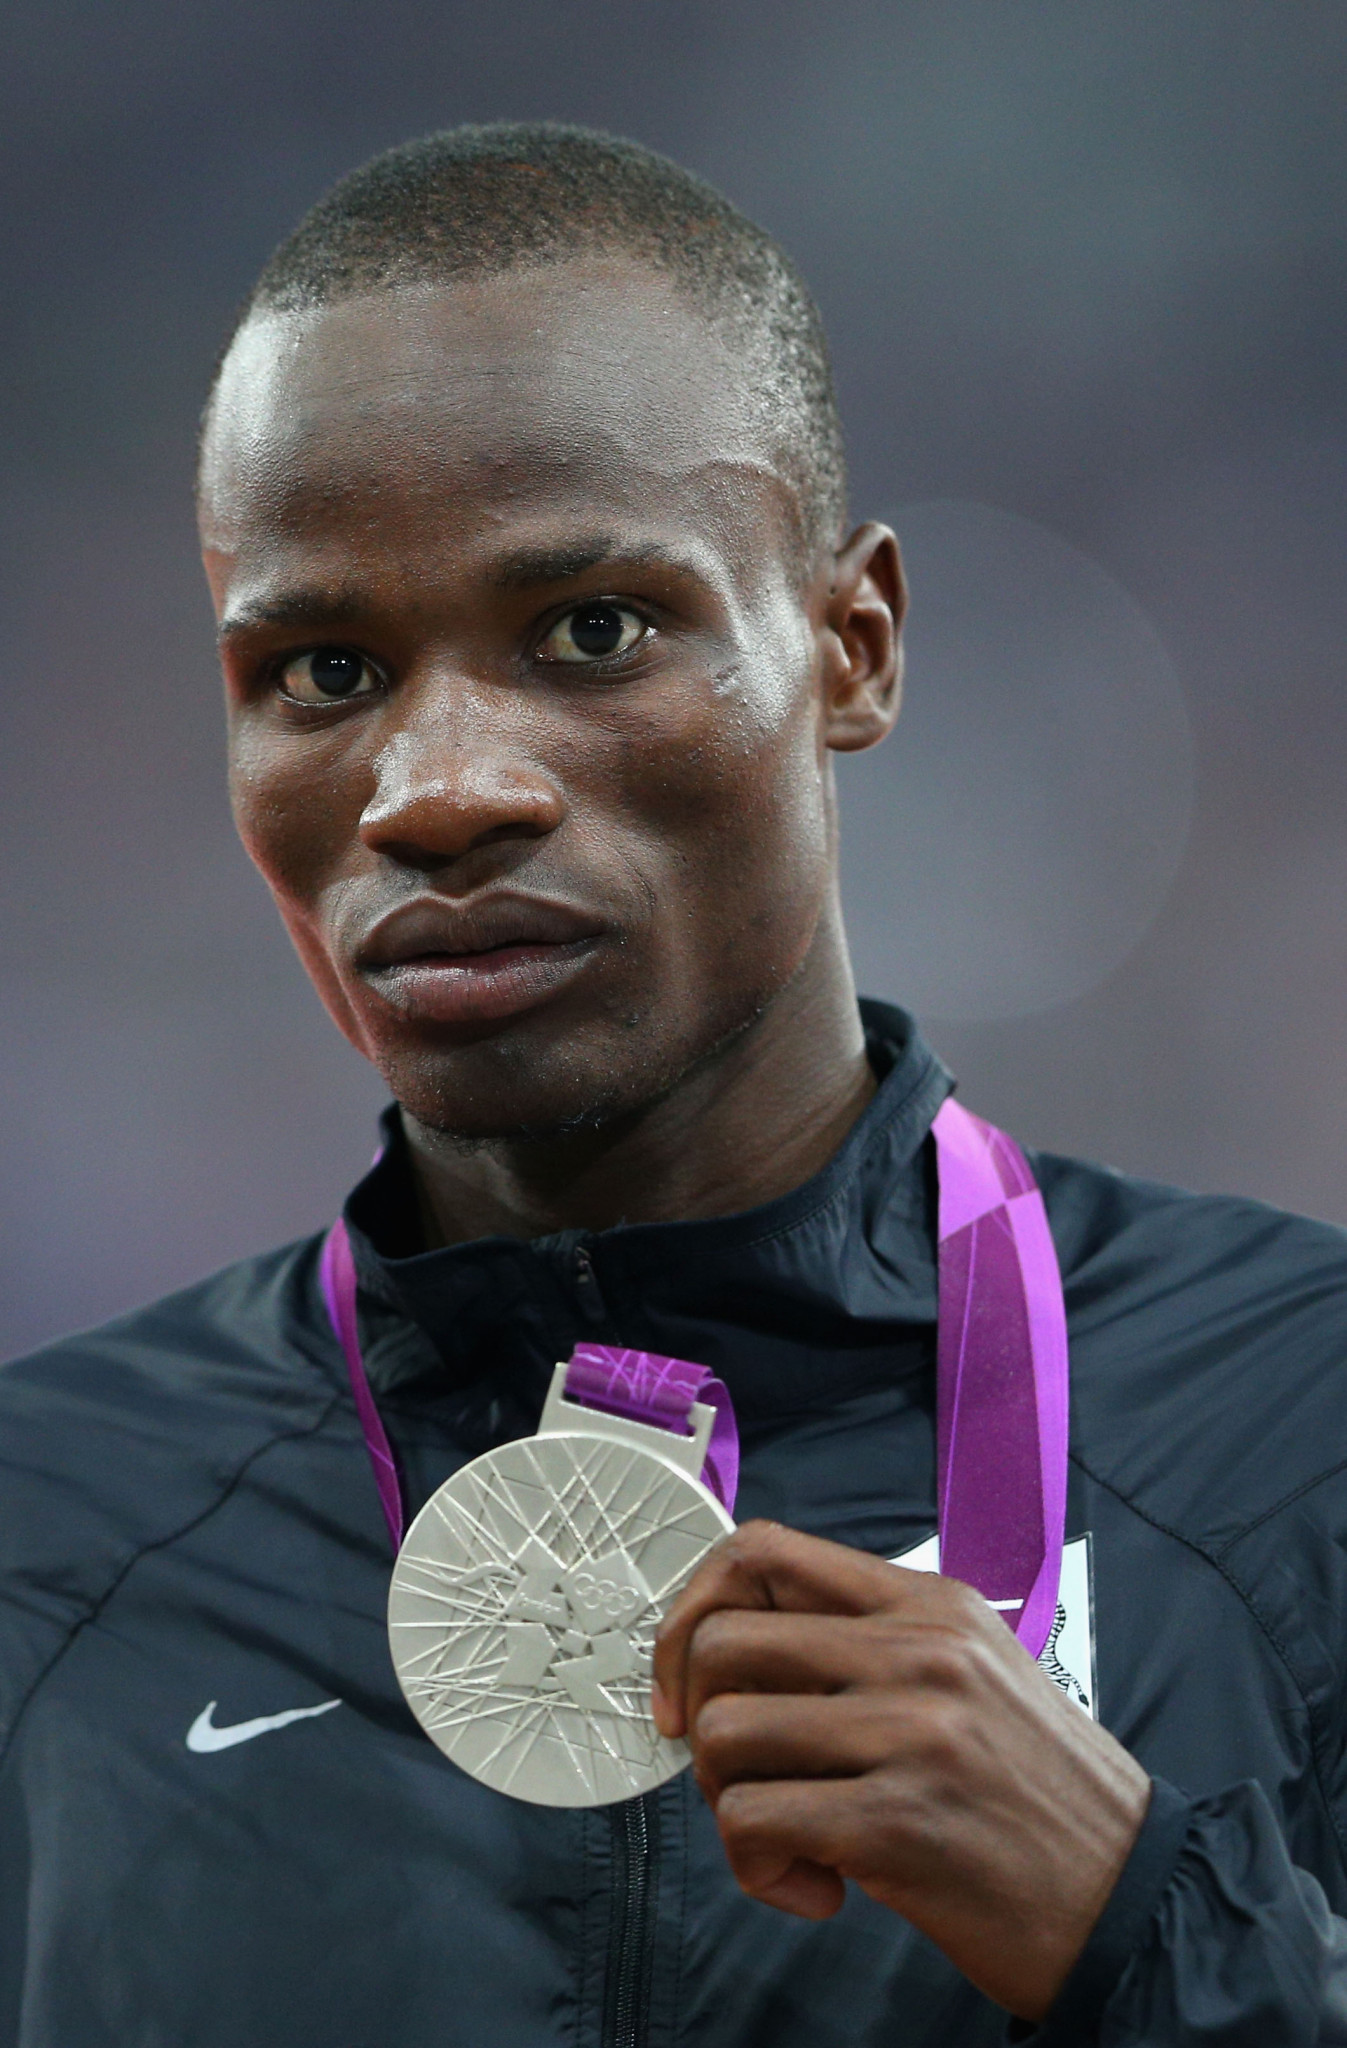 Amos plans to sell 2012 Olympic medal after drug ban